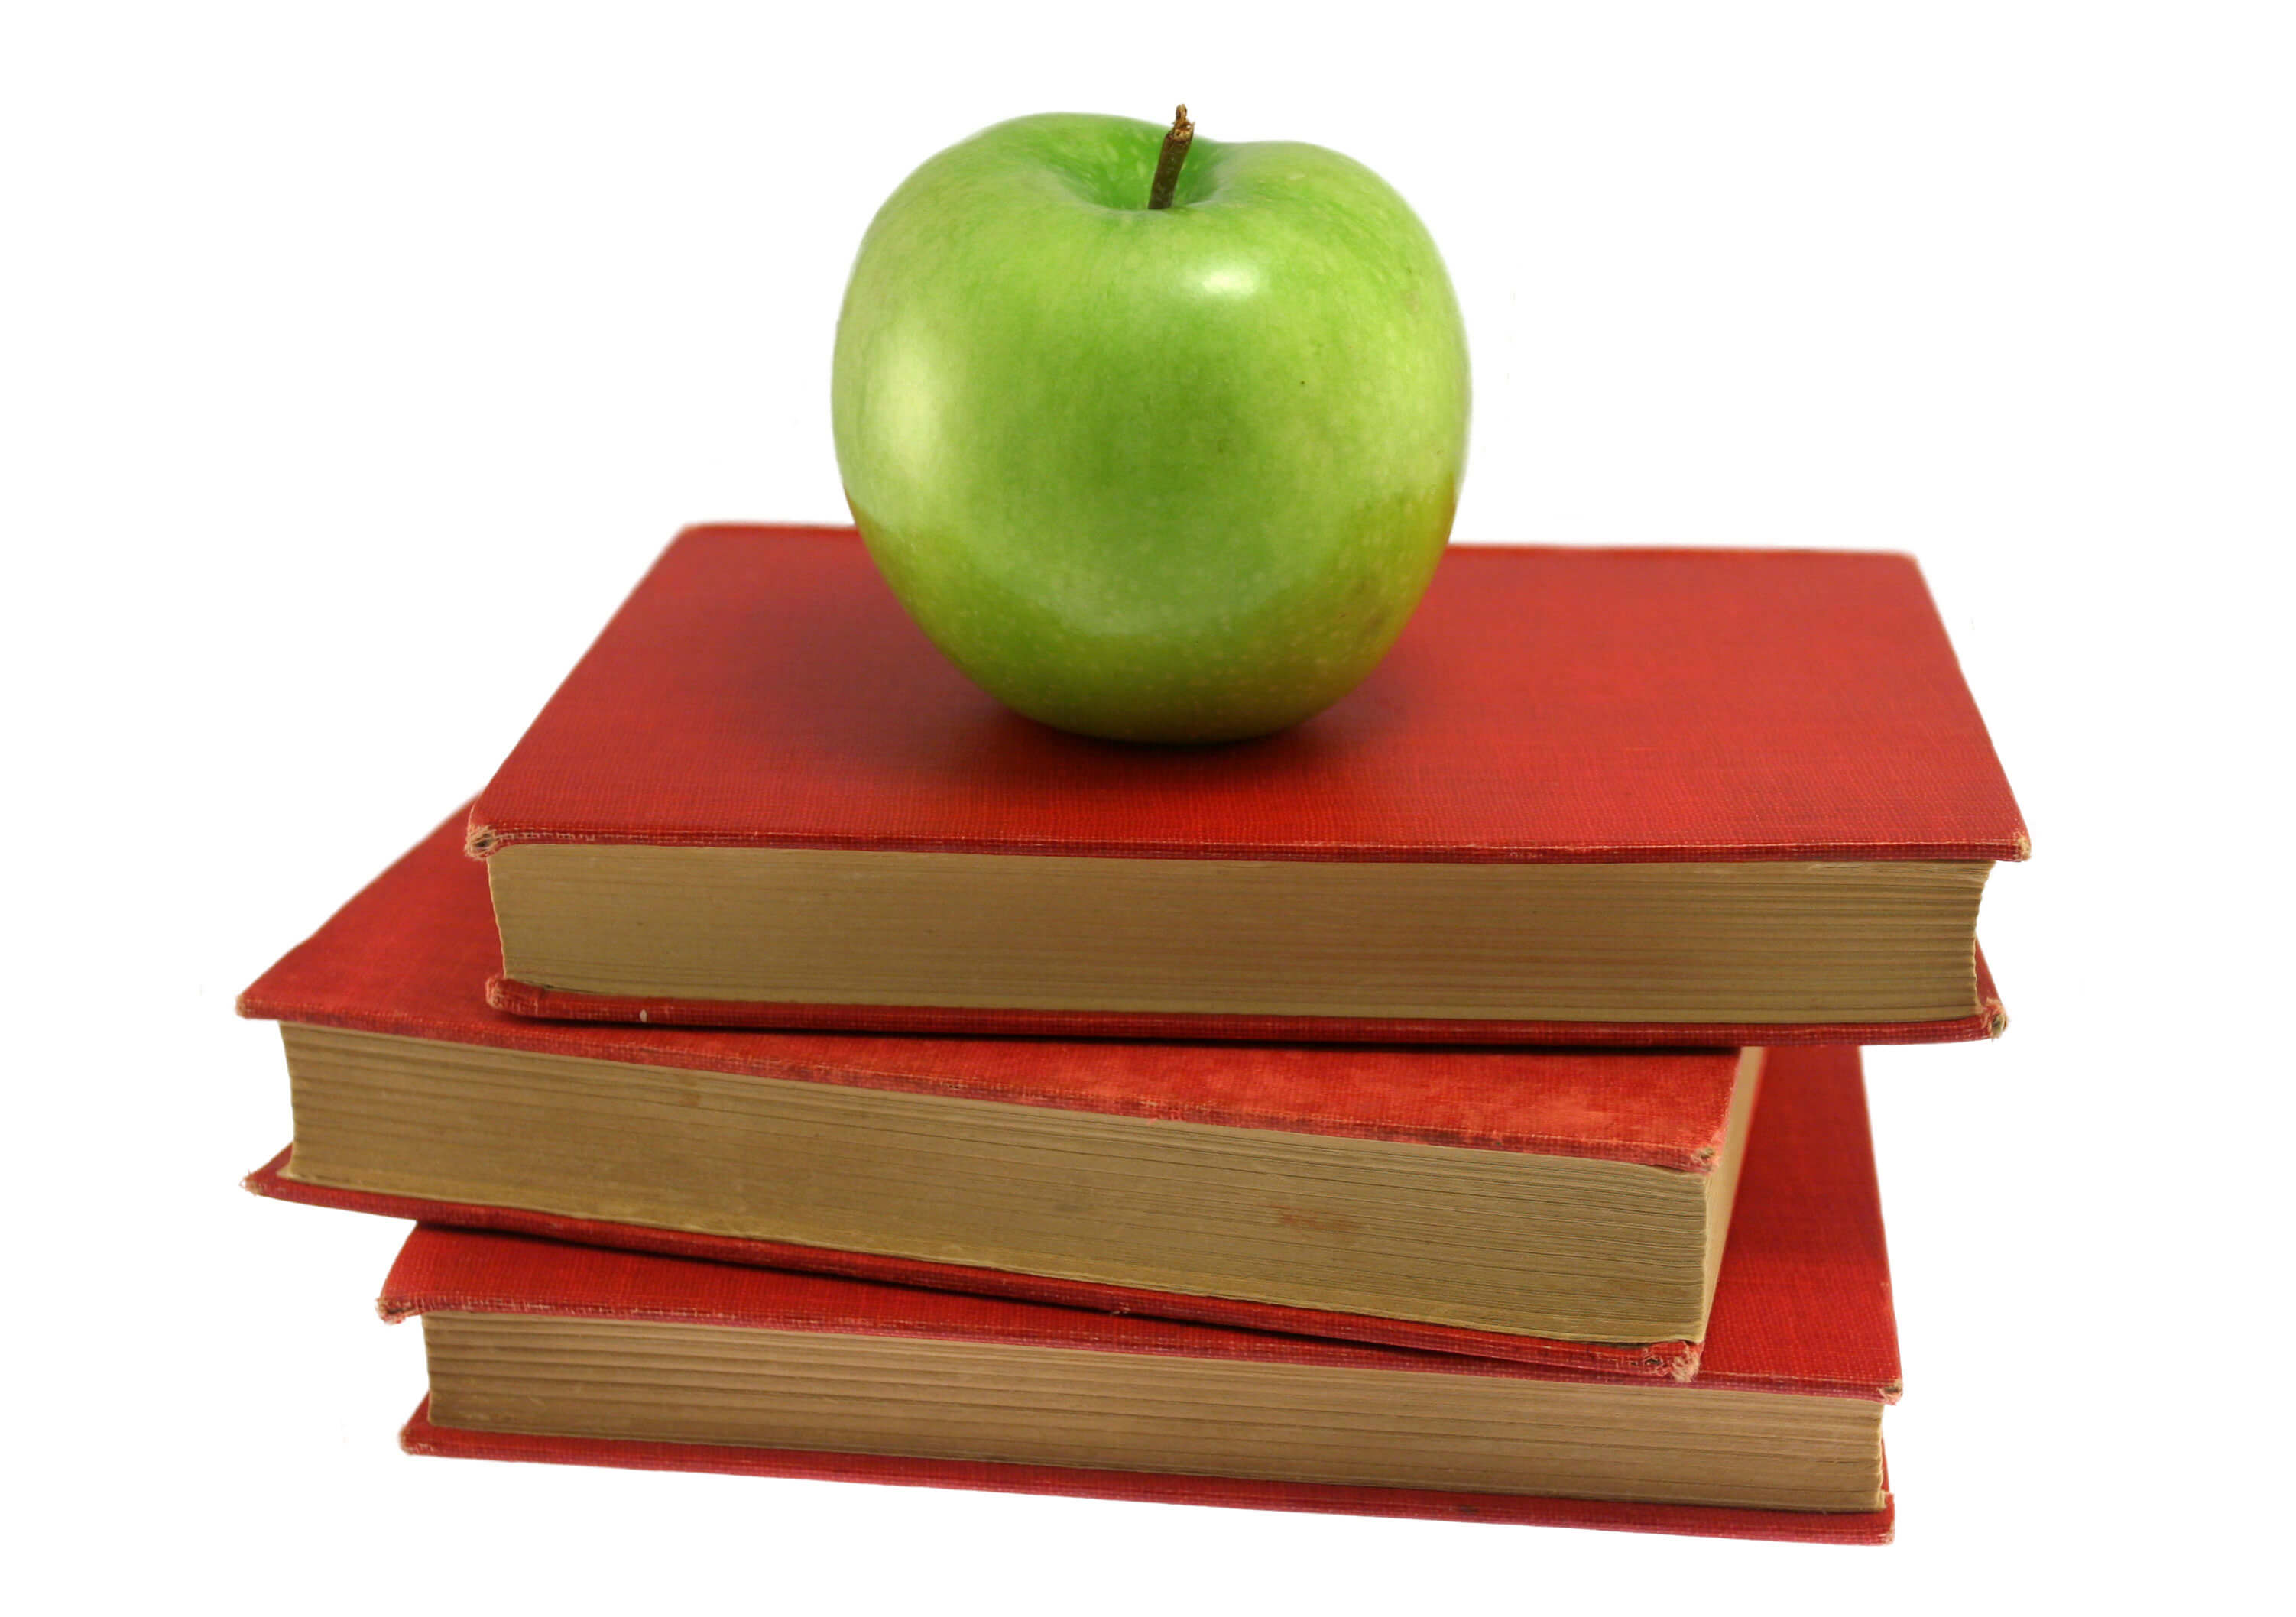 Green apple on stack of red books.